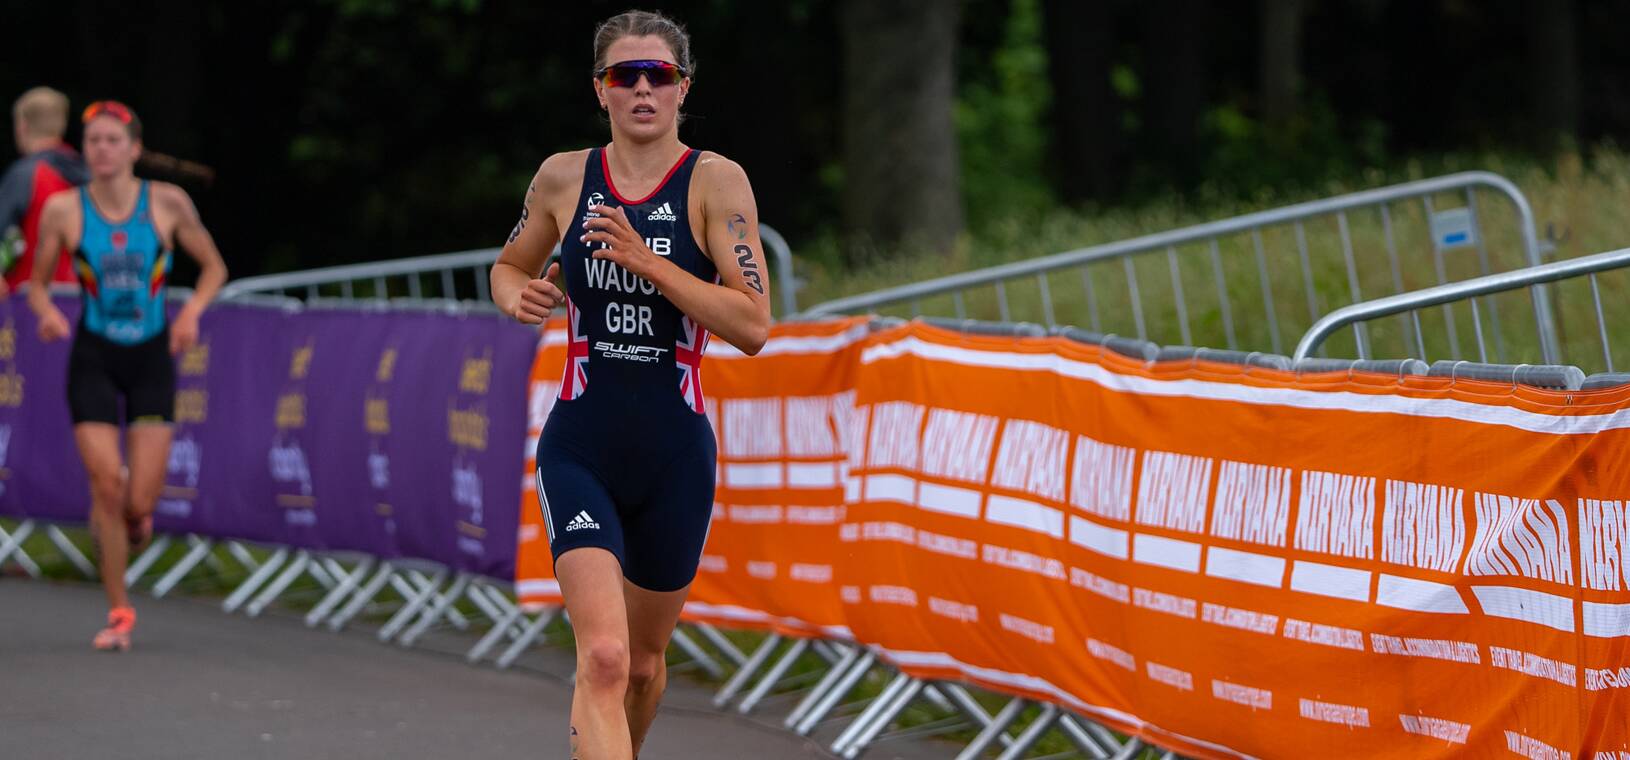 Brits ready for World Triathlon Cup Pontevedra and PTO Canadian Open